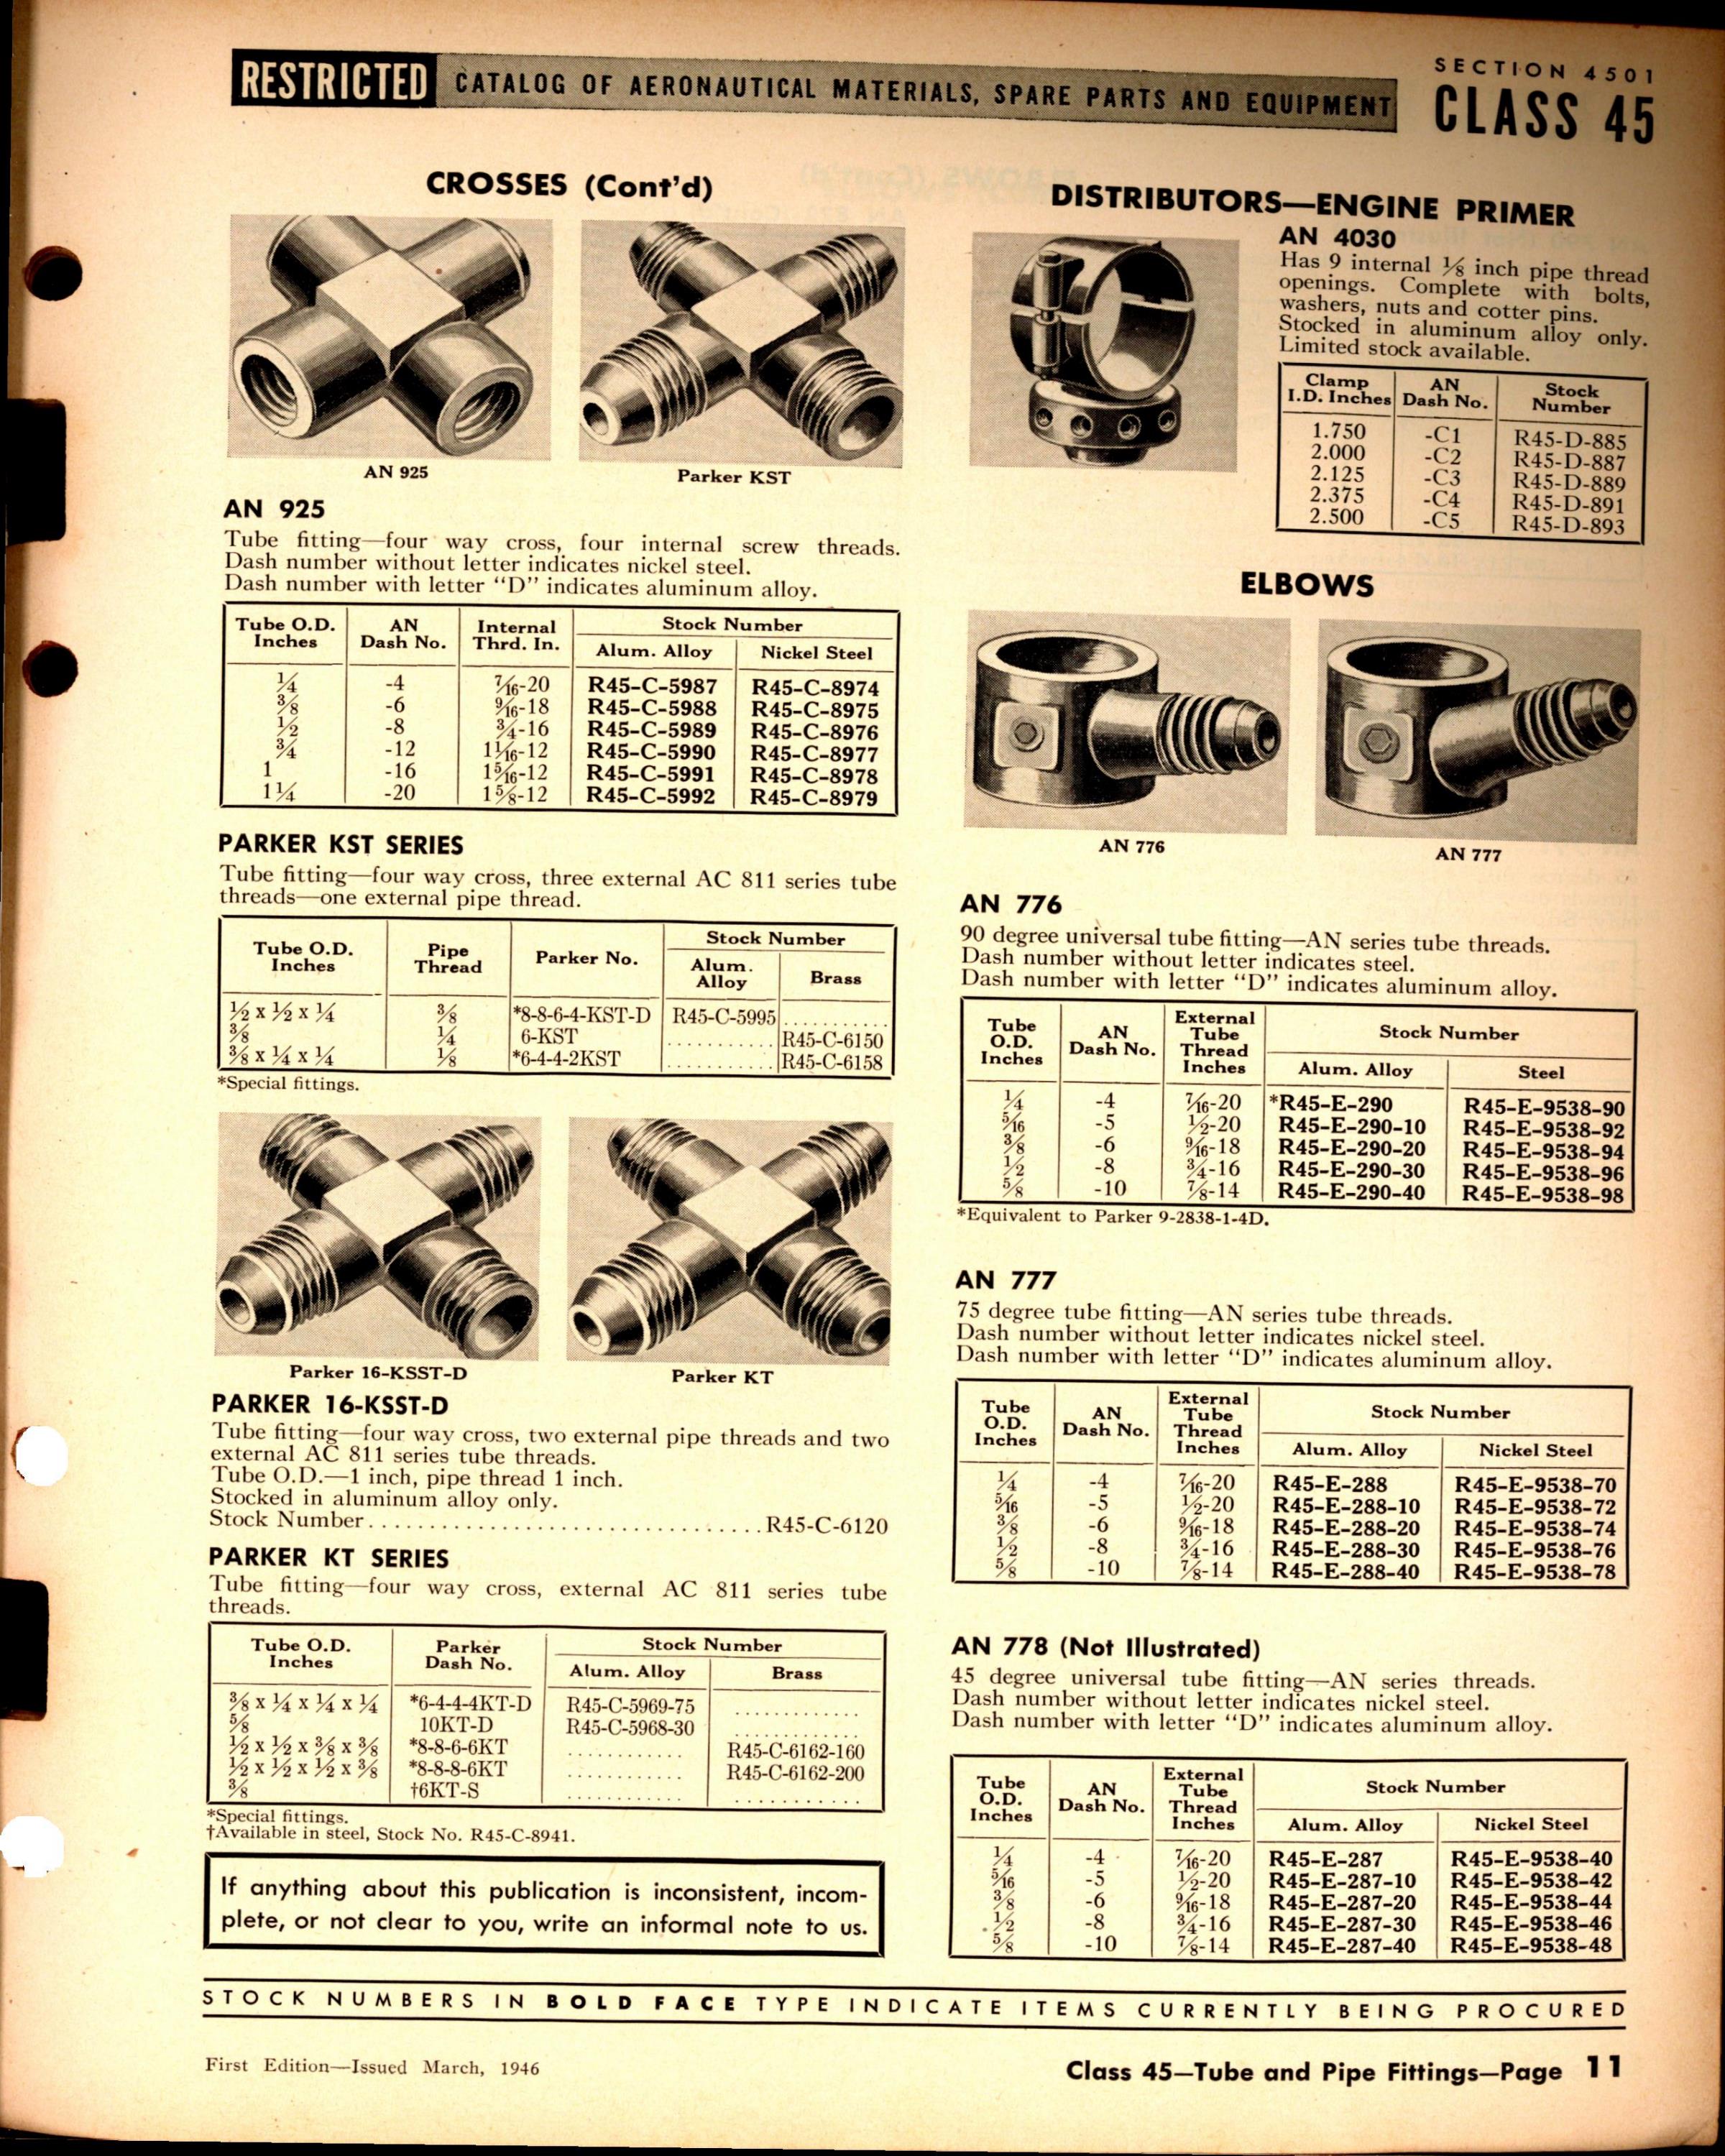 Sample page 11 from AirCorps Library document: Tube and Pipe Fittings